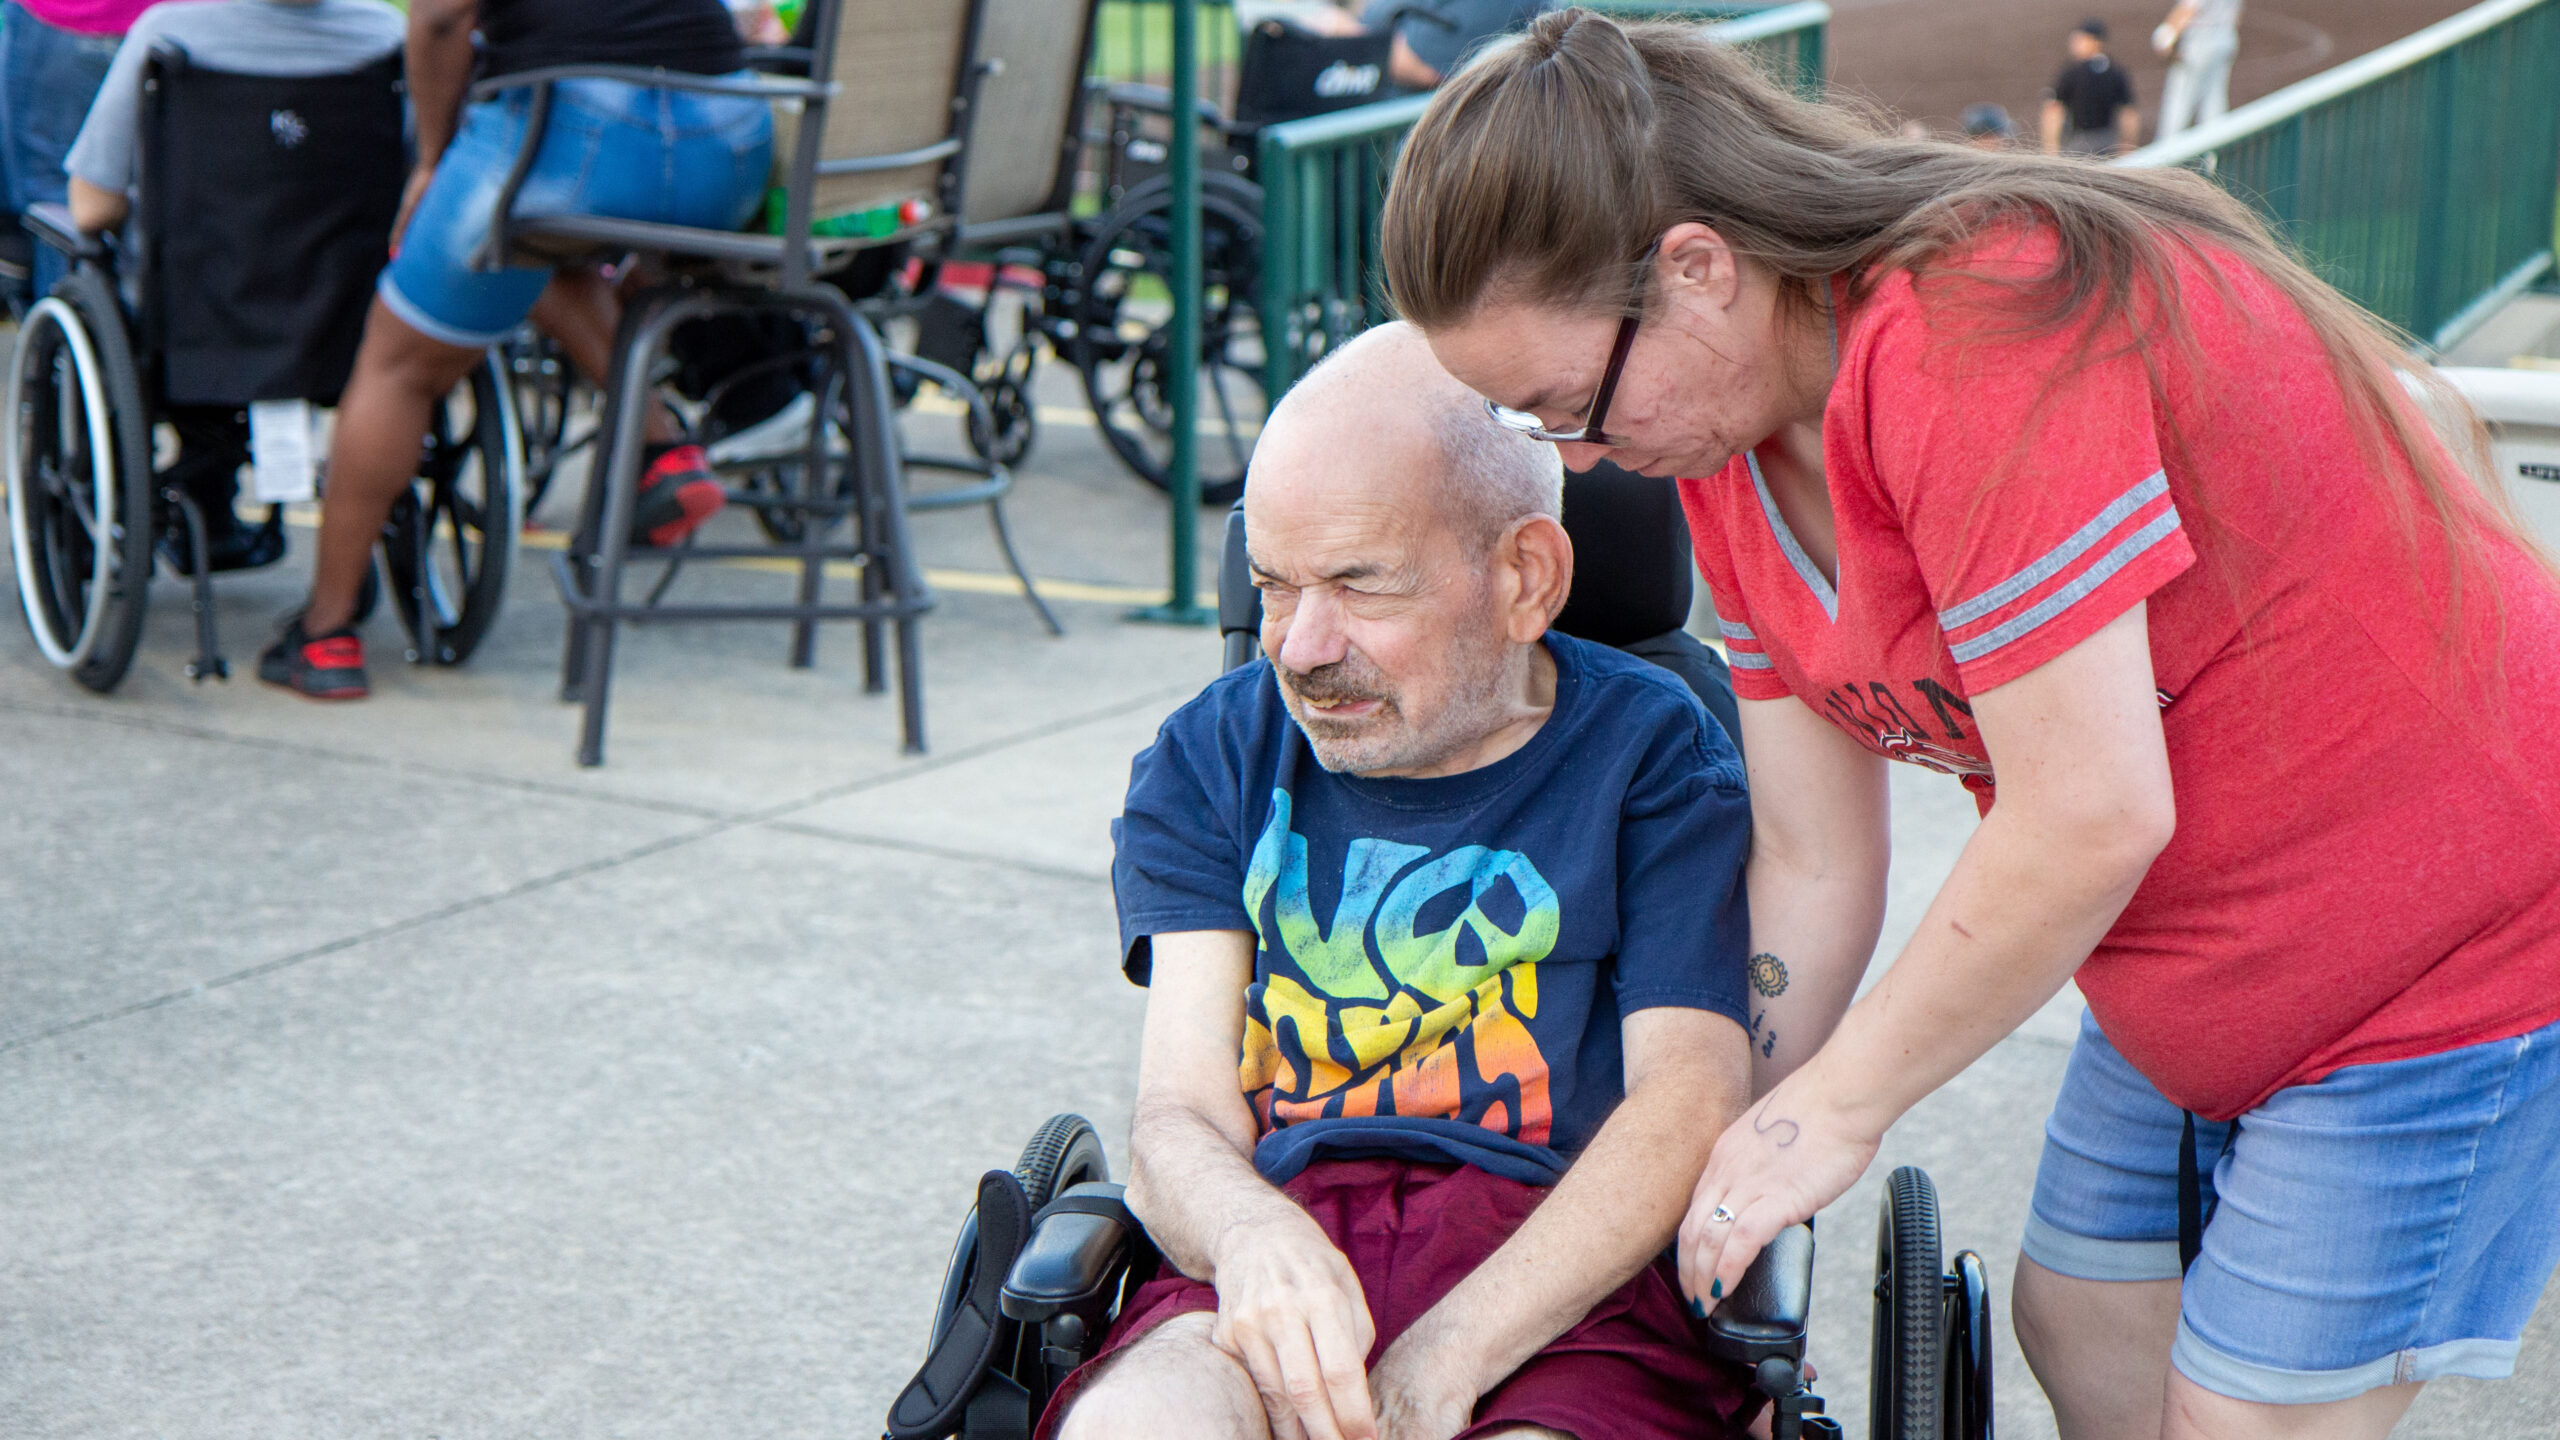 A woman in a red shirt assists a man in a wheelchair outdoors.